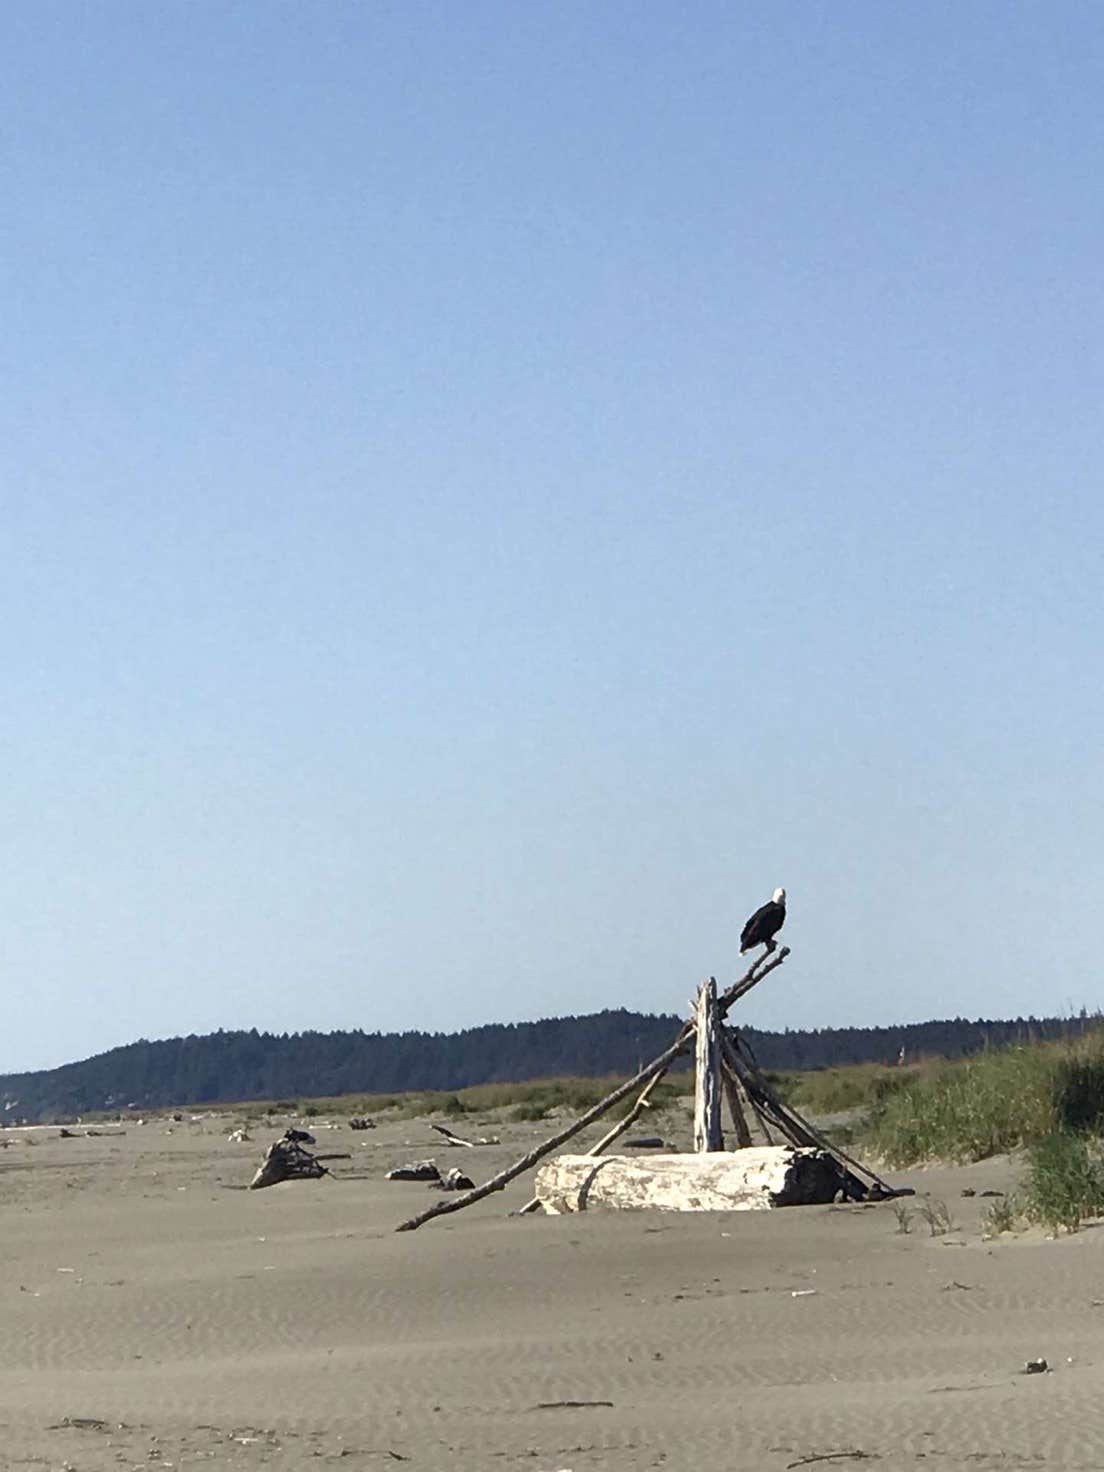 Camper submitted image from Western Horizon Ocean Shores - 1